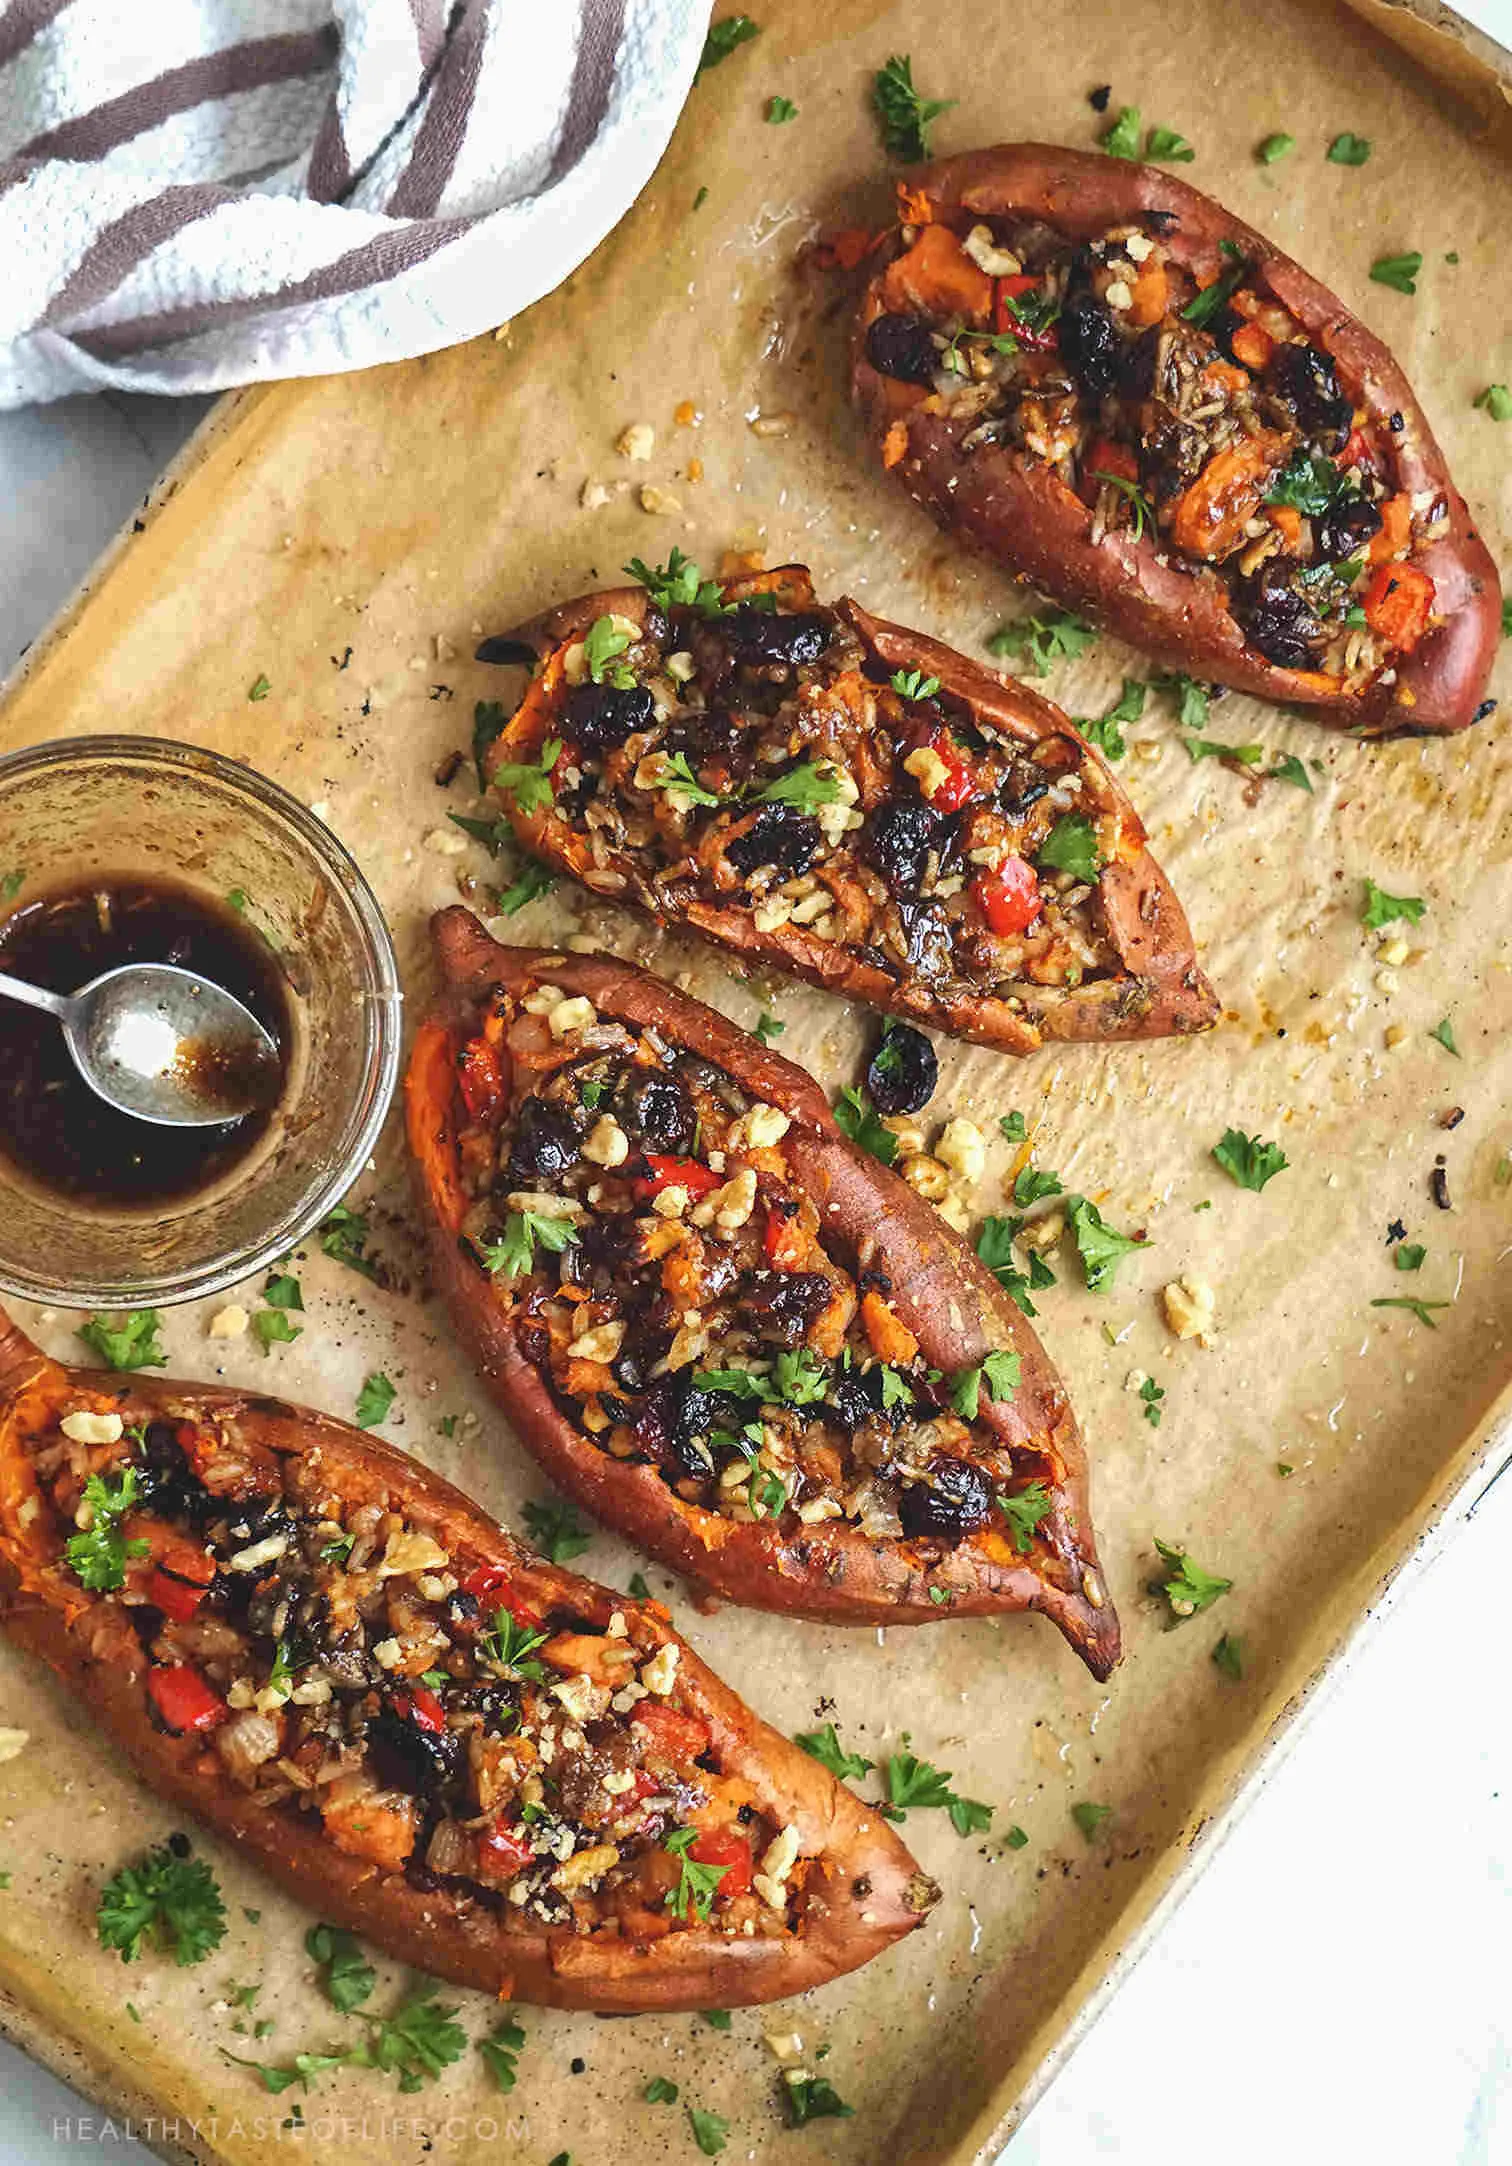 Overhead shot of baked sweet potatoes stuffed with savory filling comprised of rice, veggies, dried fruit and nuts finished with balsamic sauce.